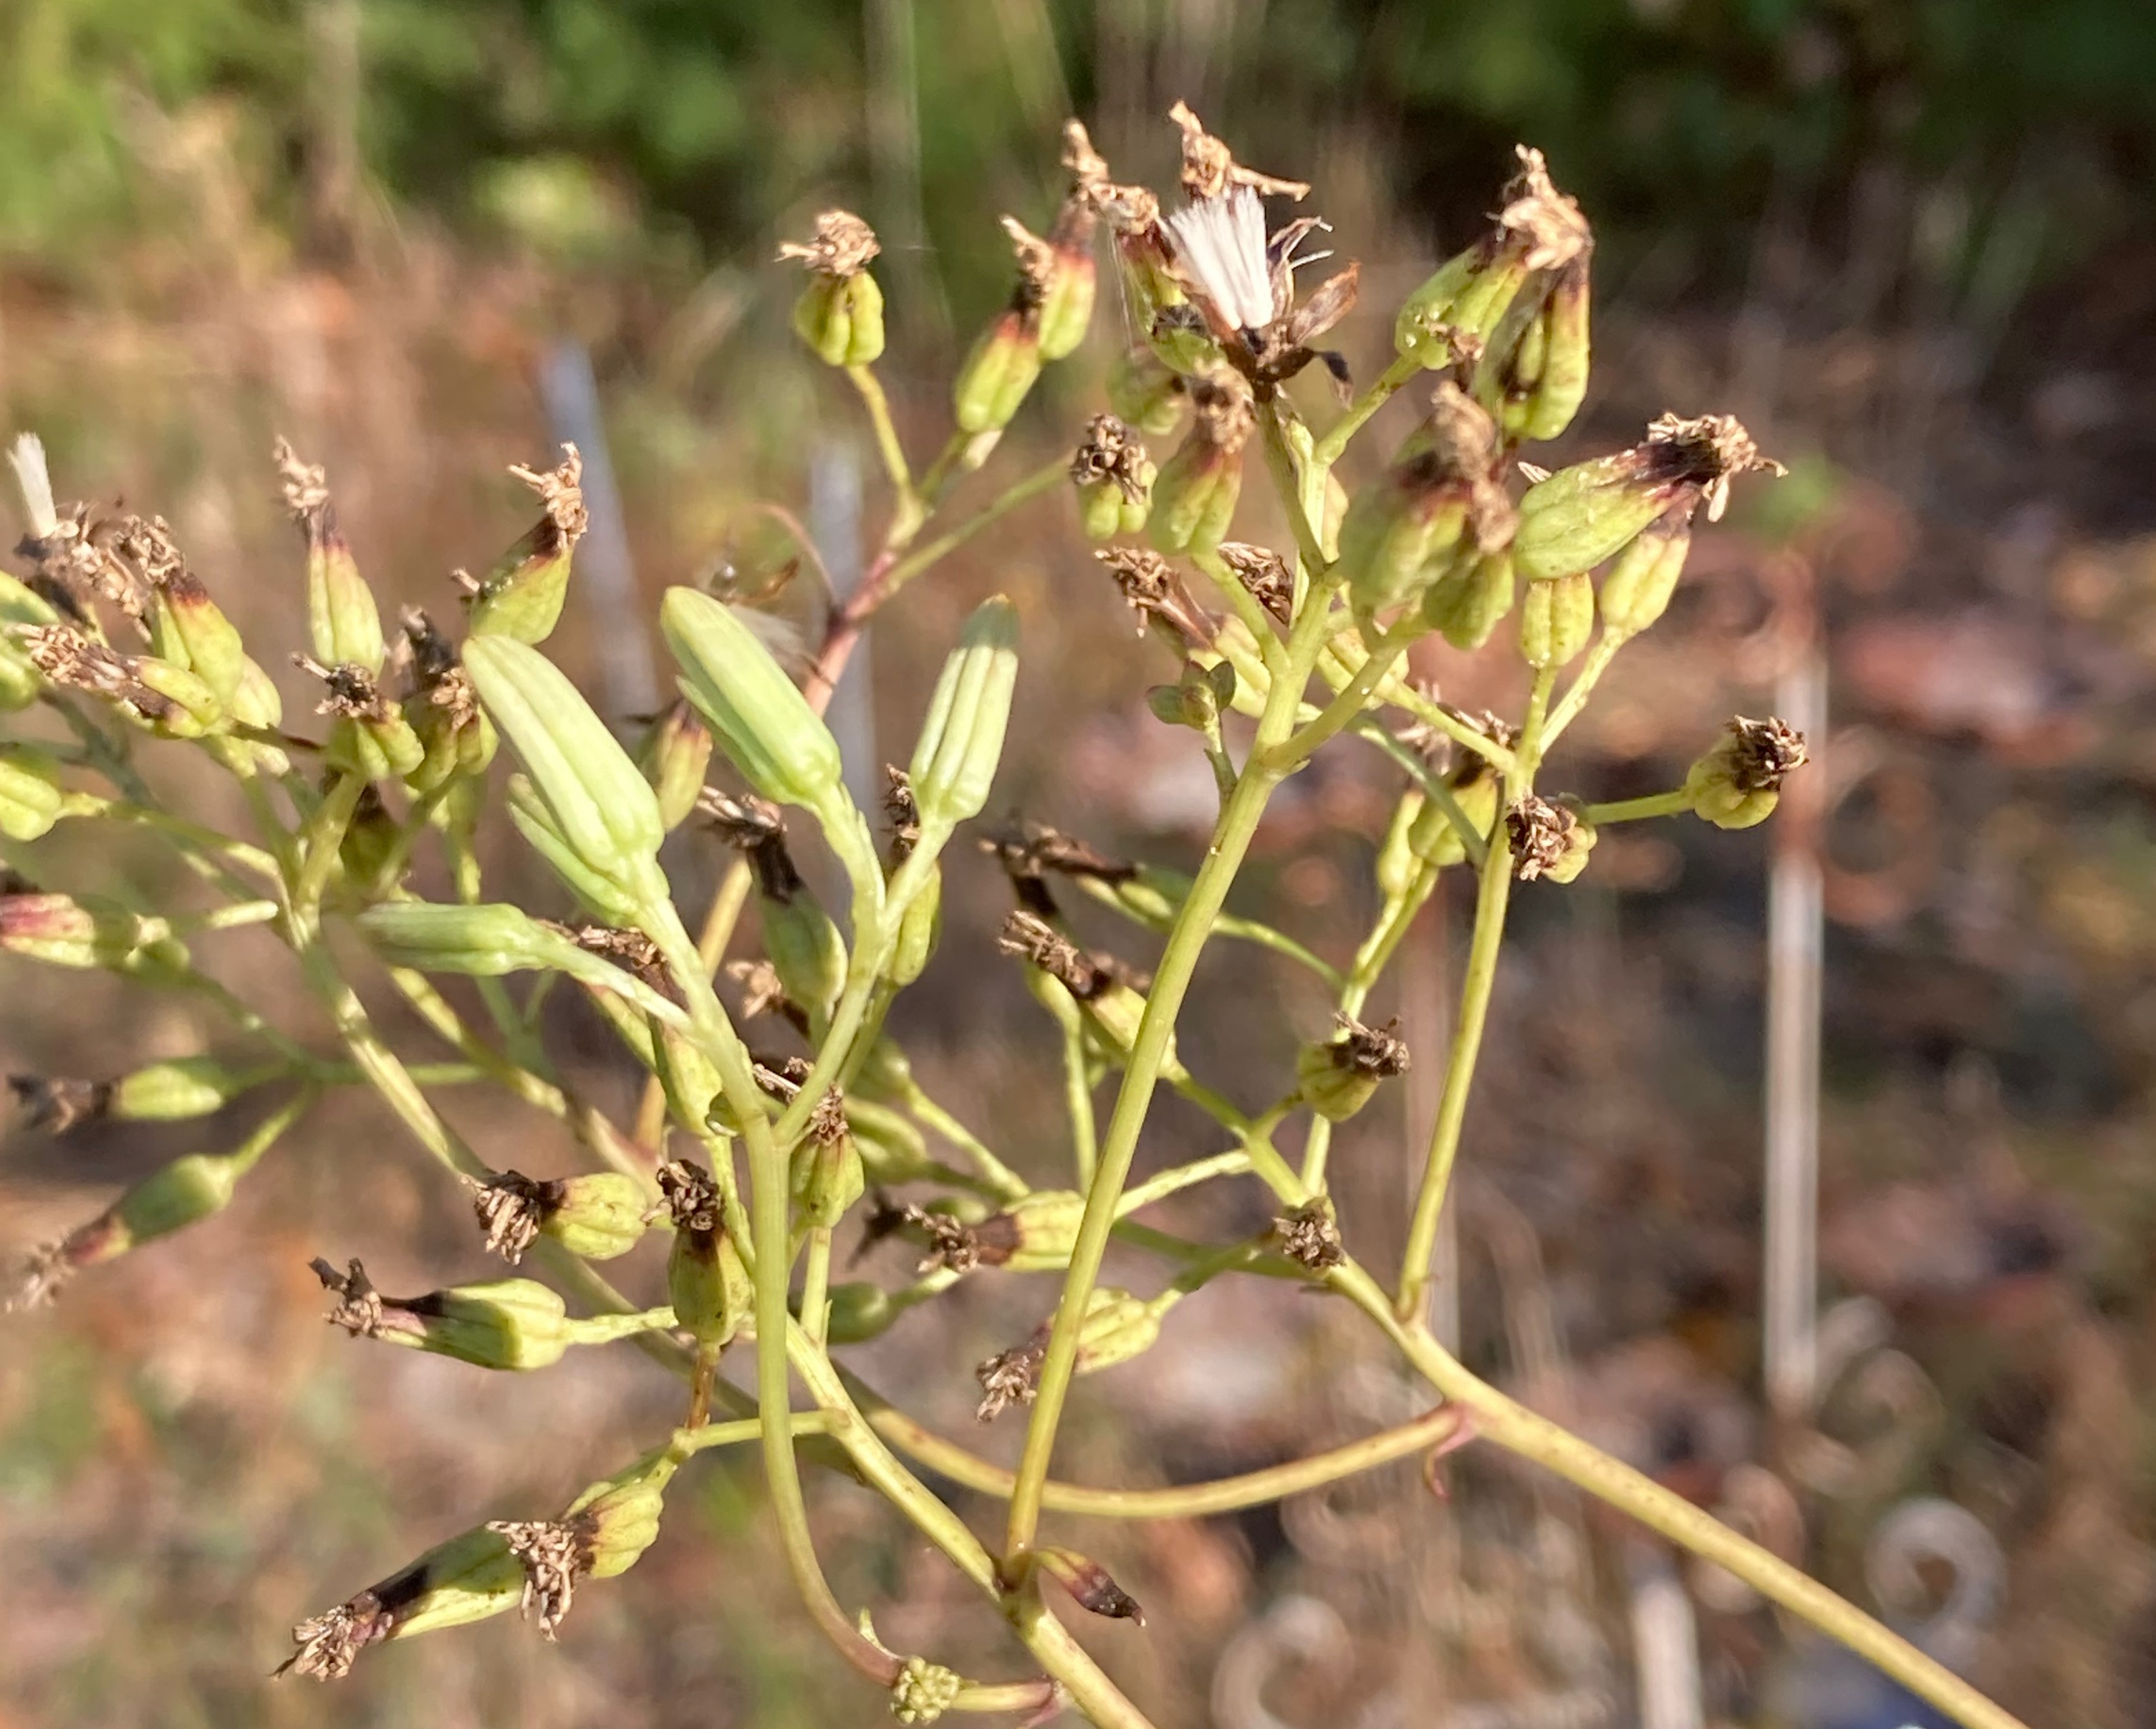 The Scientific Name is Arnoglossum atriplicifolium [= Cacalia atriplicifolia]. You will likely hear them called Pale Indian-plantain. This picture shows the The inflorescence at the end of the season. of Arnoglossum atriplicifolium [= Cacalia atriplicifolia]